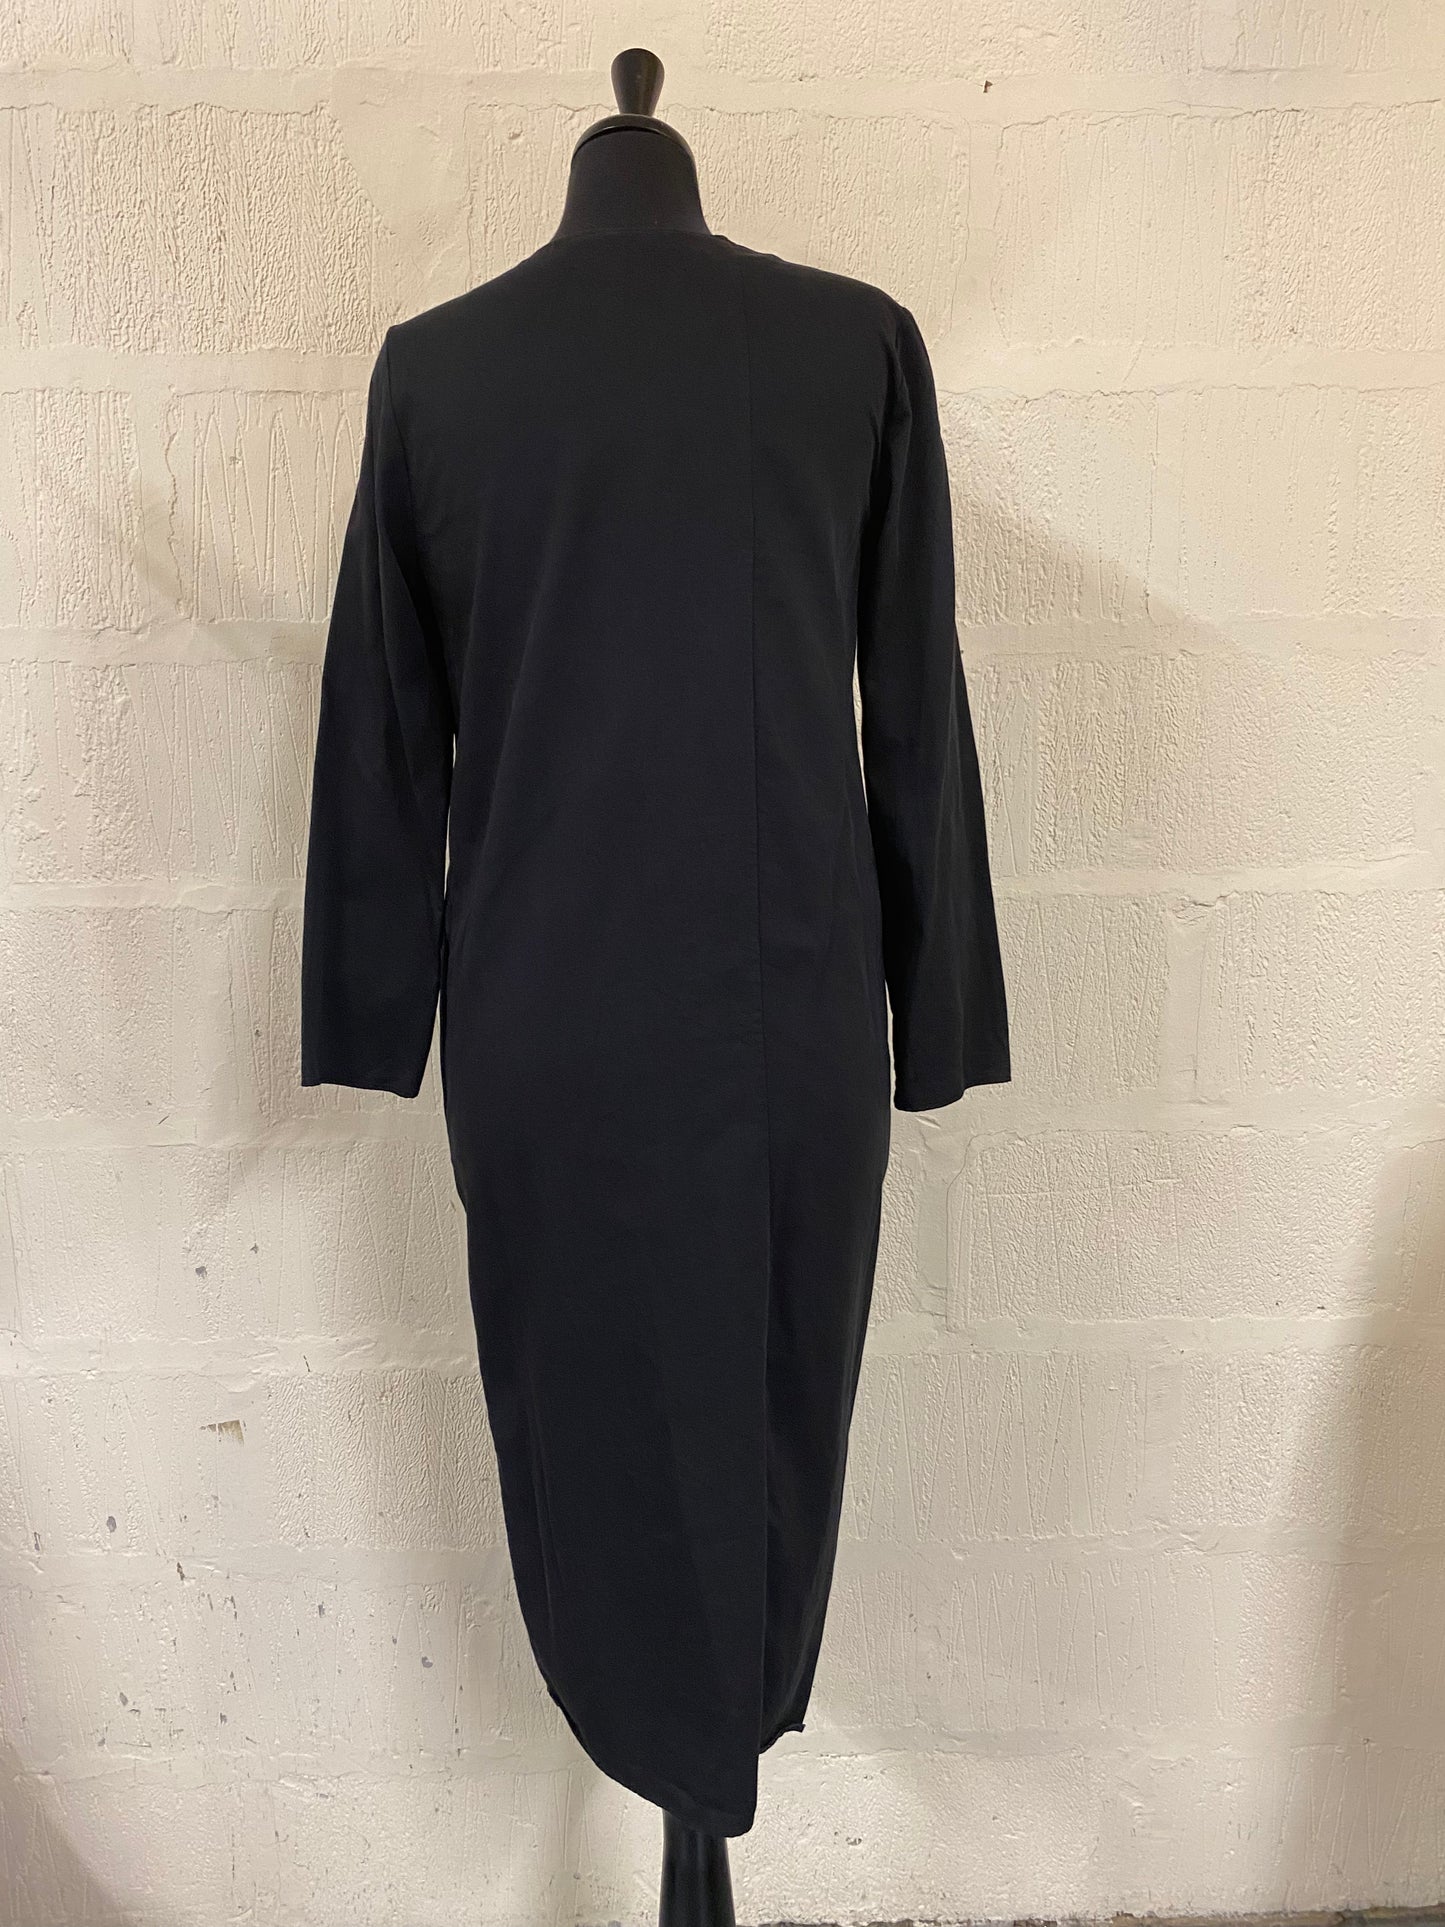 Black Wrap Cos Dress with Tie Front Size 10